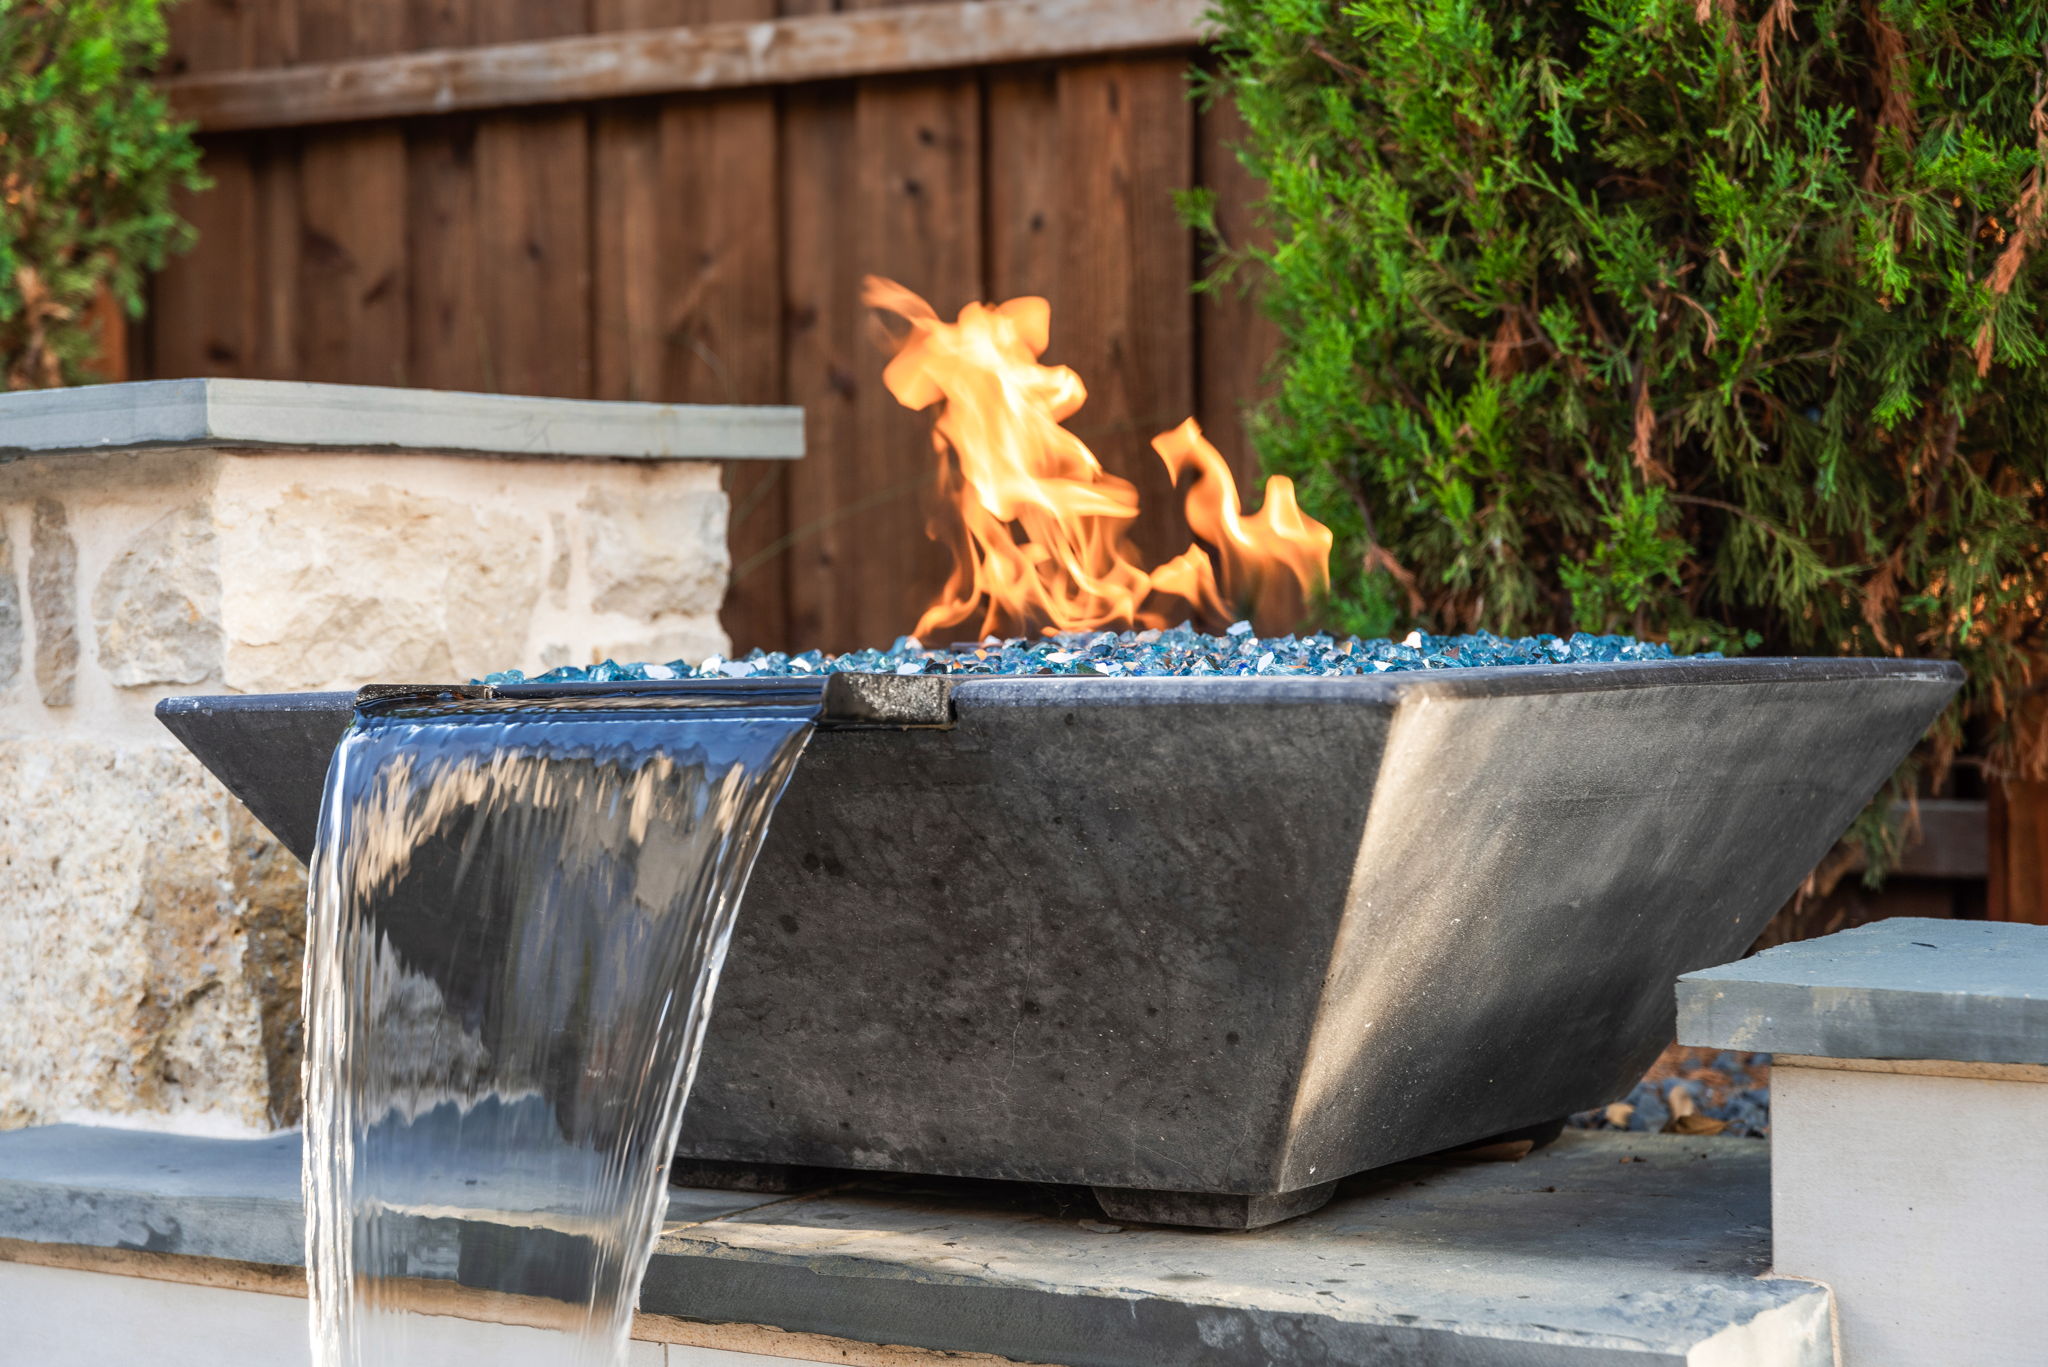 Swimming pool water and fire bowl